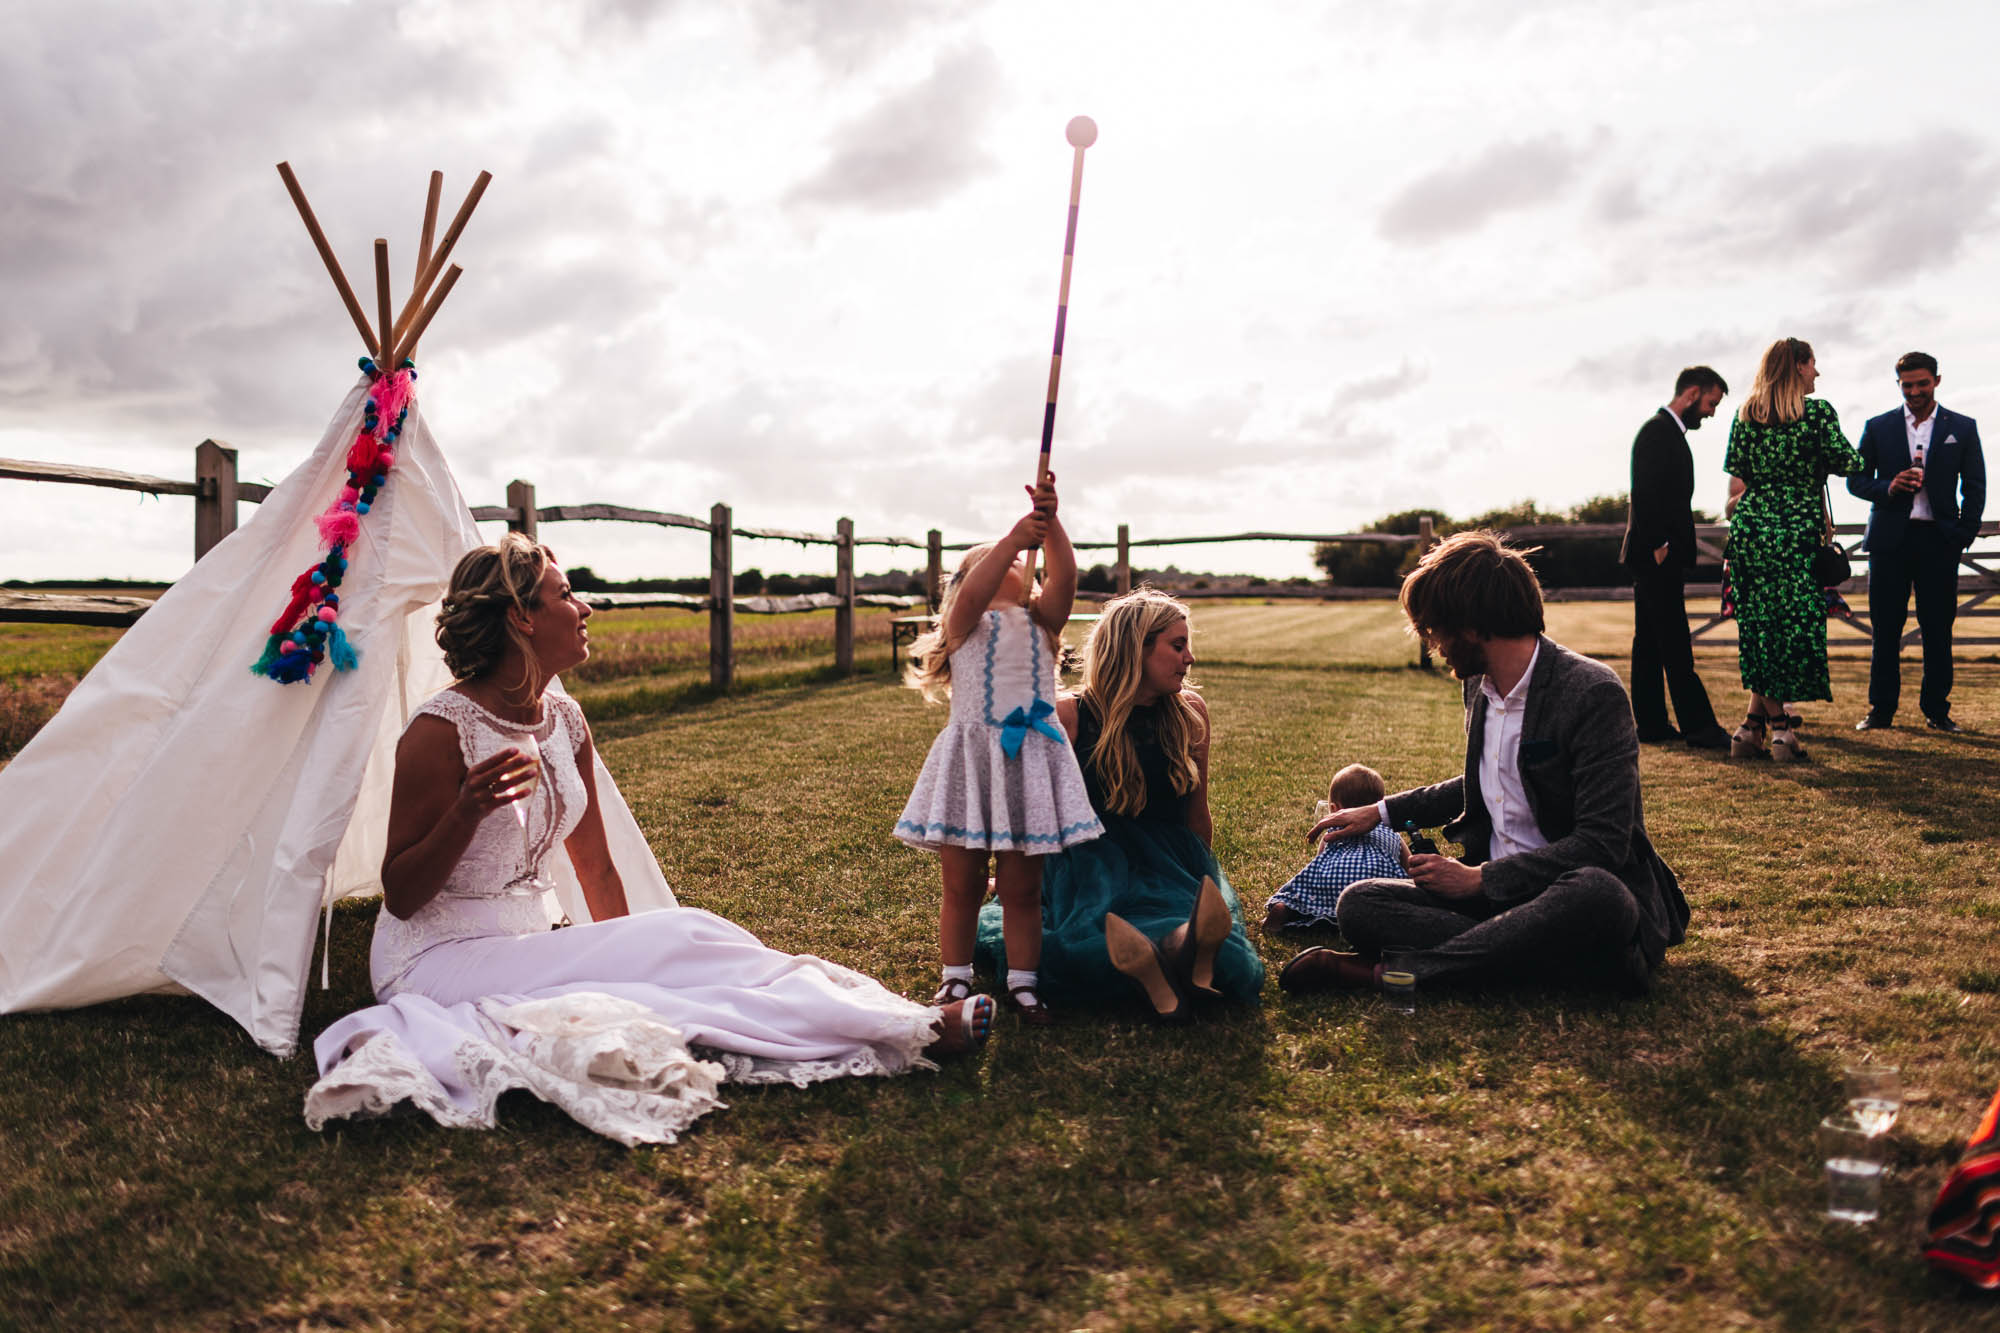 brides sat next to child tent while the kids play around her